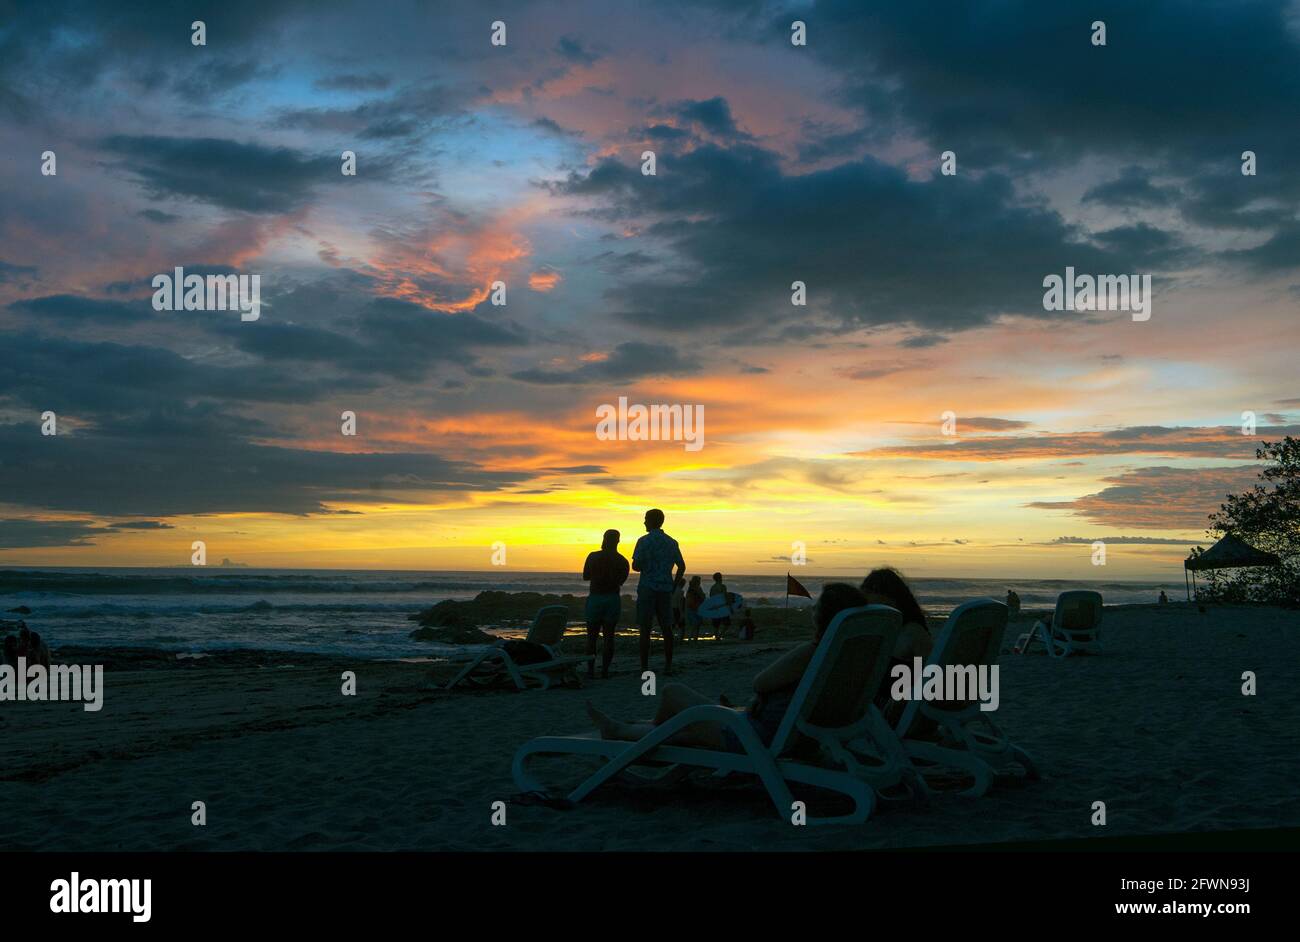 People watching a dramatic sunset from a beach in Costa Rica Stock Photo